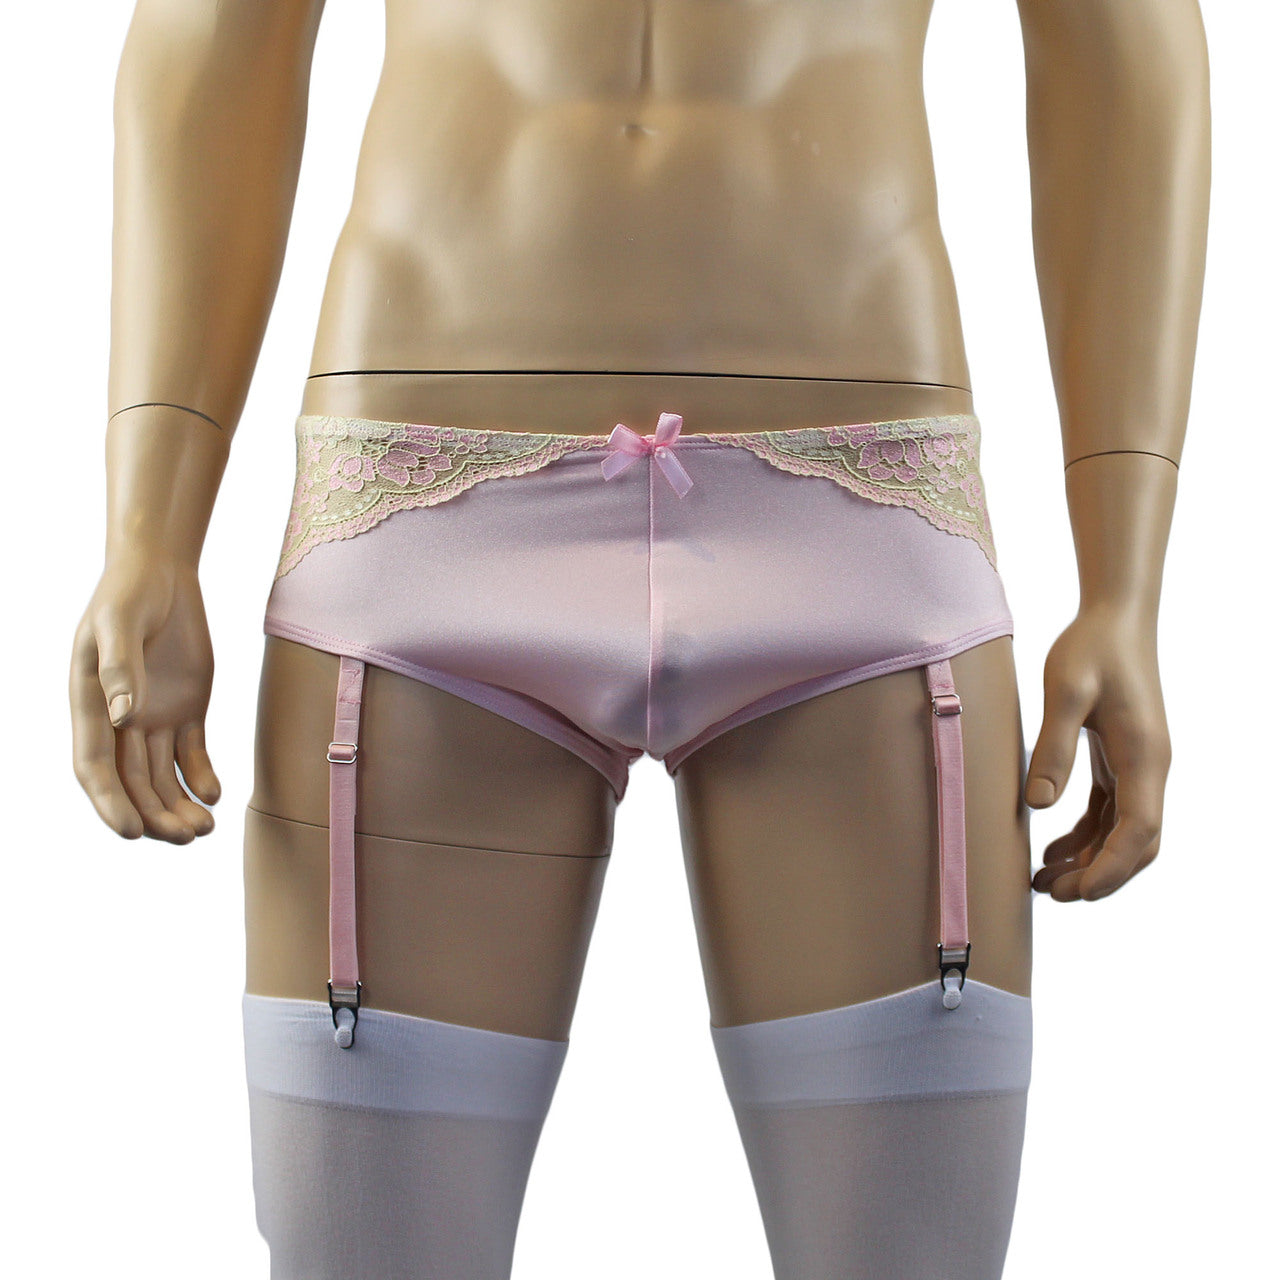 Mens Luxury Mini Bikini Brief with Detachable Garters and Stockings  (pink plus other colours)